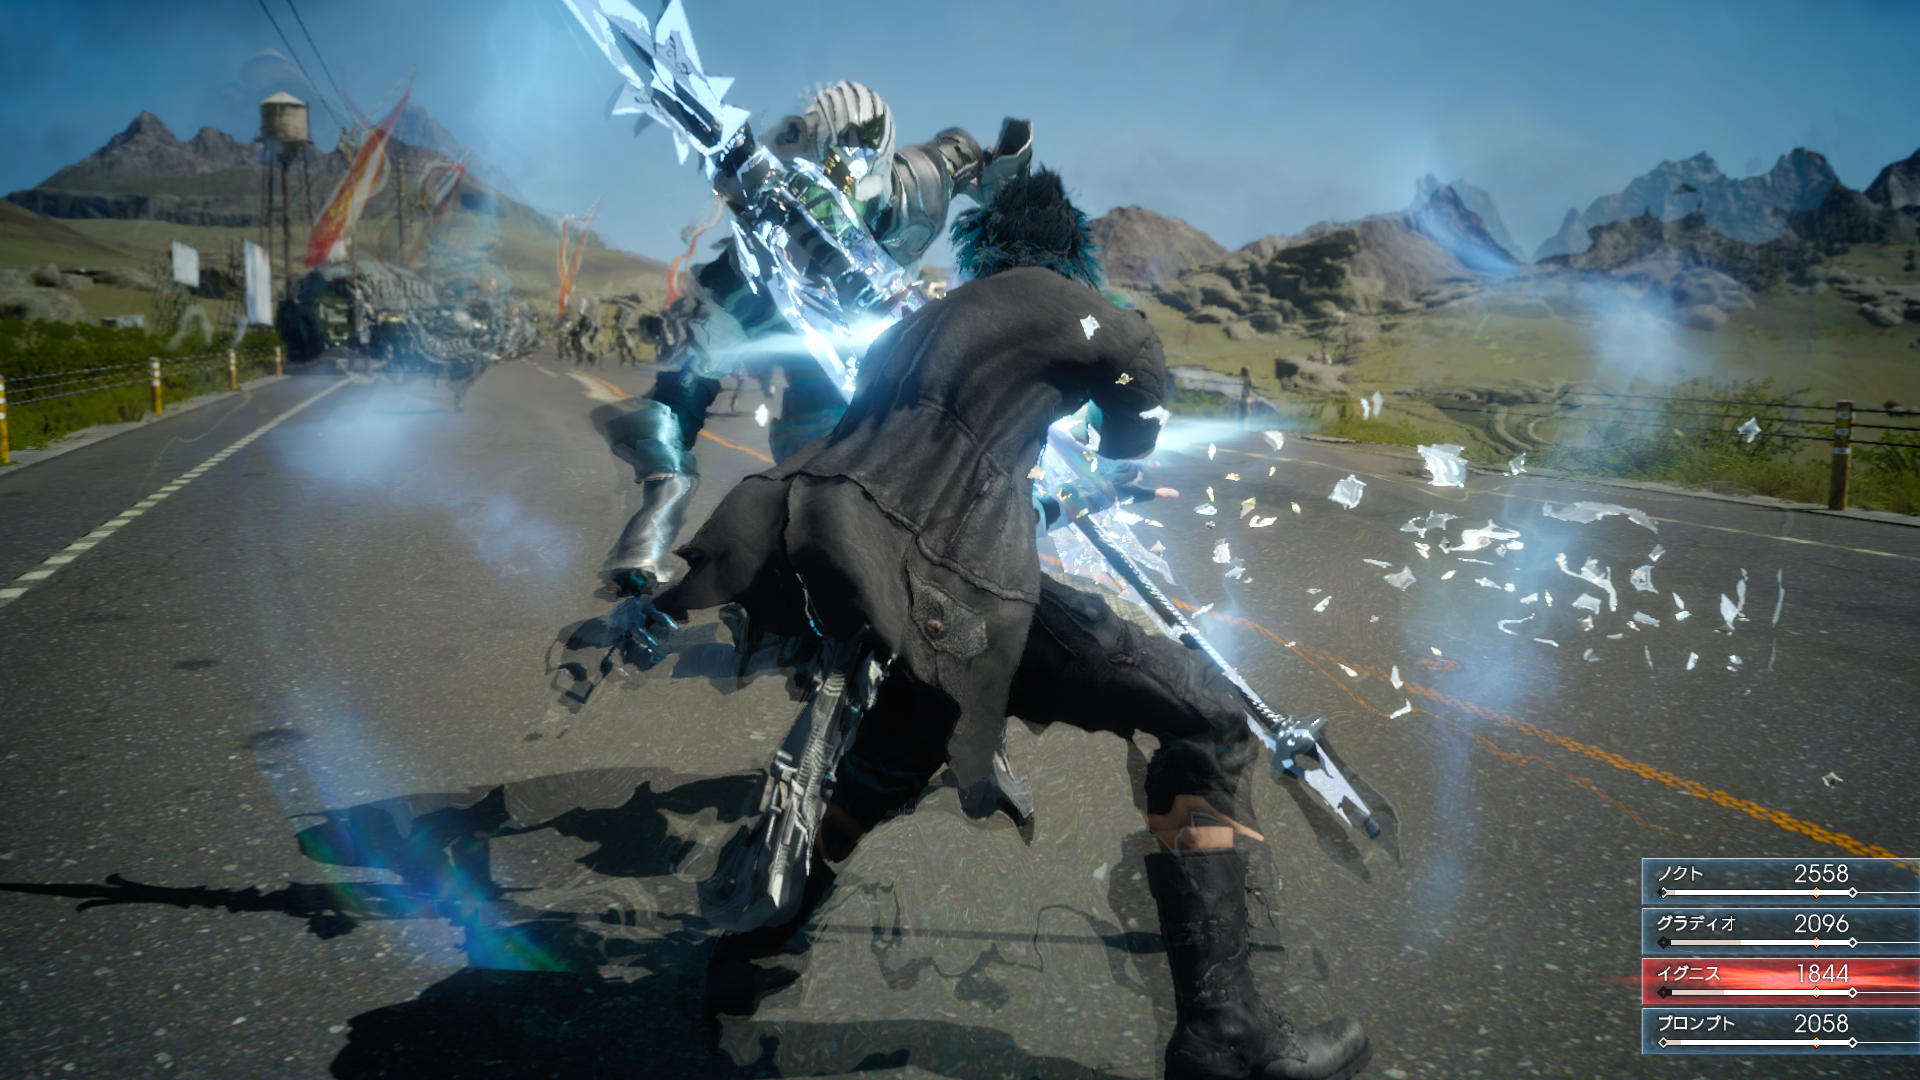 Overtreding Reden Ouderling Final Fantasy XV off to a strong start in UK; second-fastest selling game  behind FFXIII - Nova Crystallis